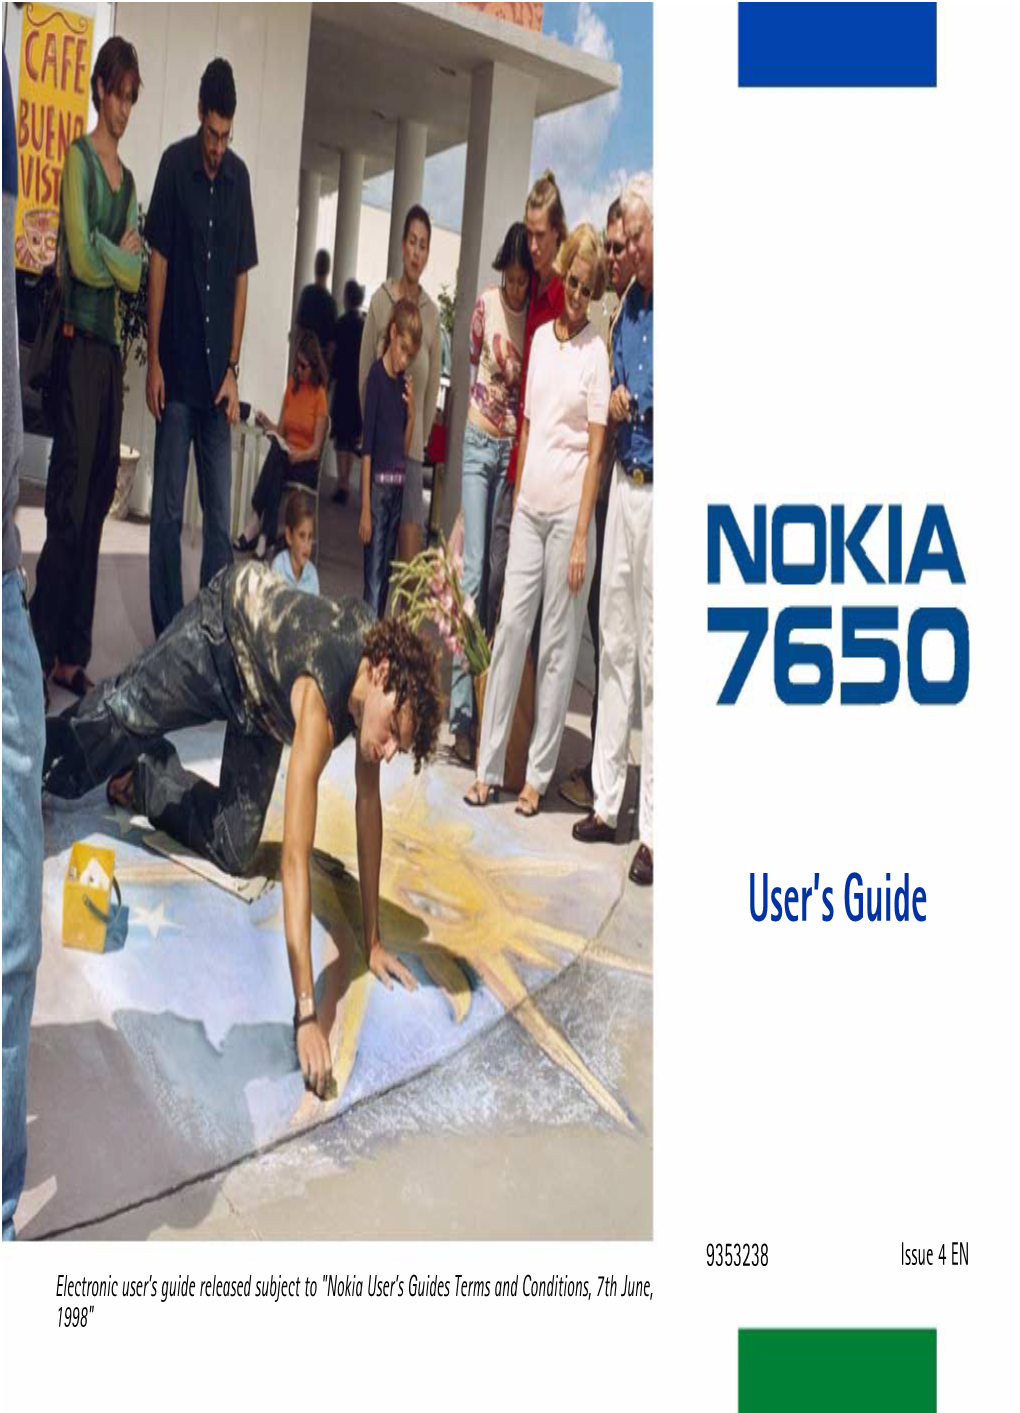 Nokia 7650 Provides Various Functions, Which Are Very Handy for Daily Use, Such As Camera, Clock, Alarm Clock, Calculator, and Calendar